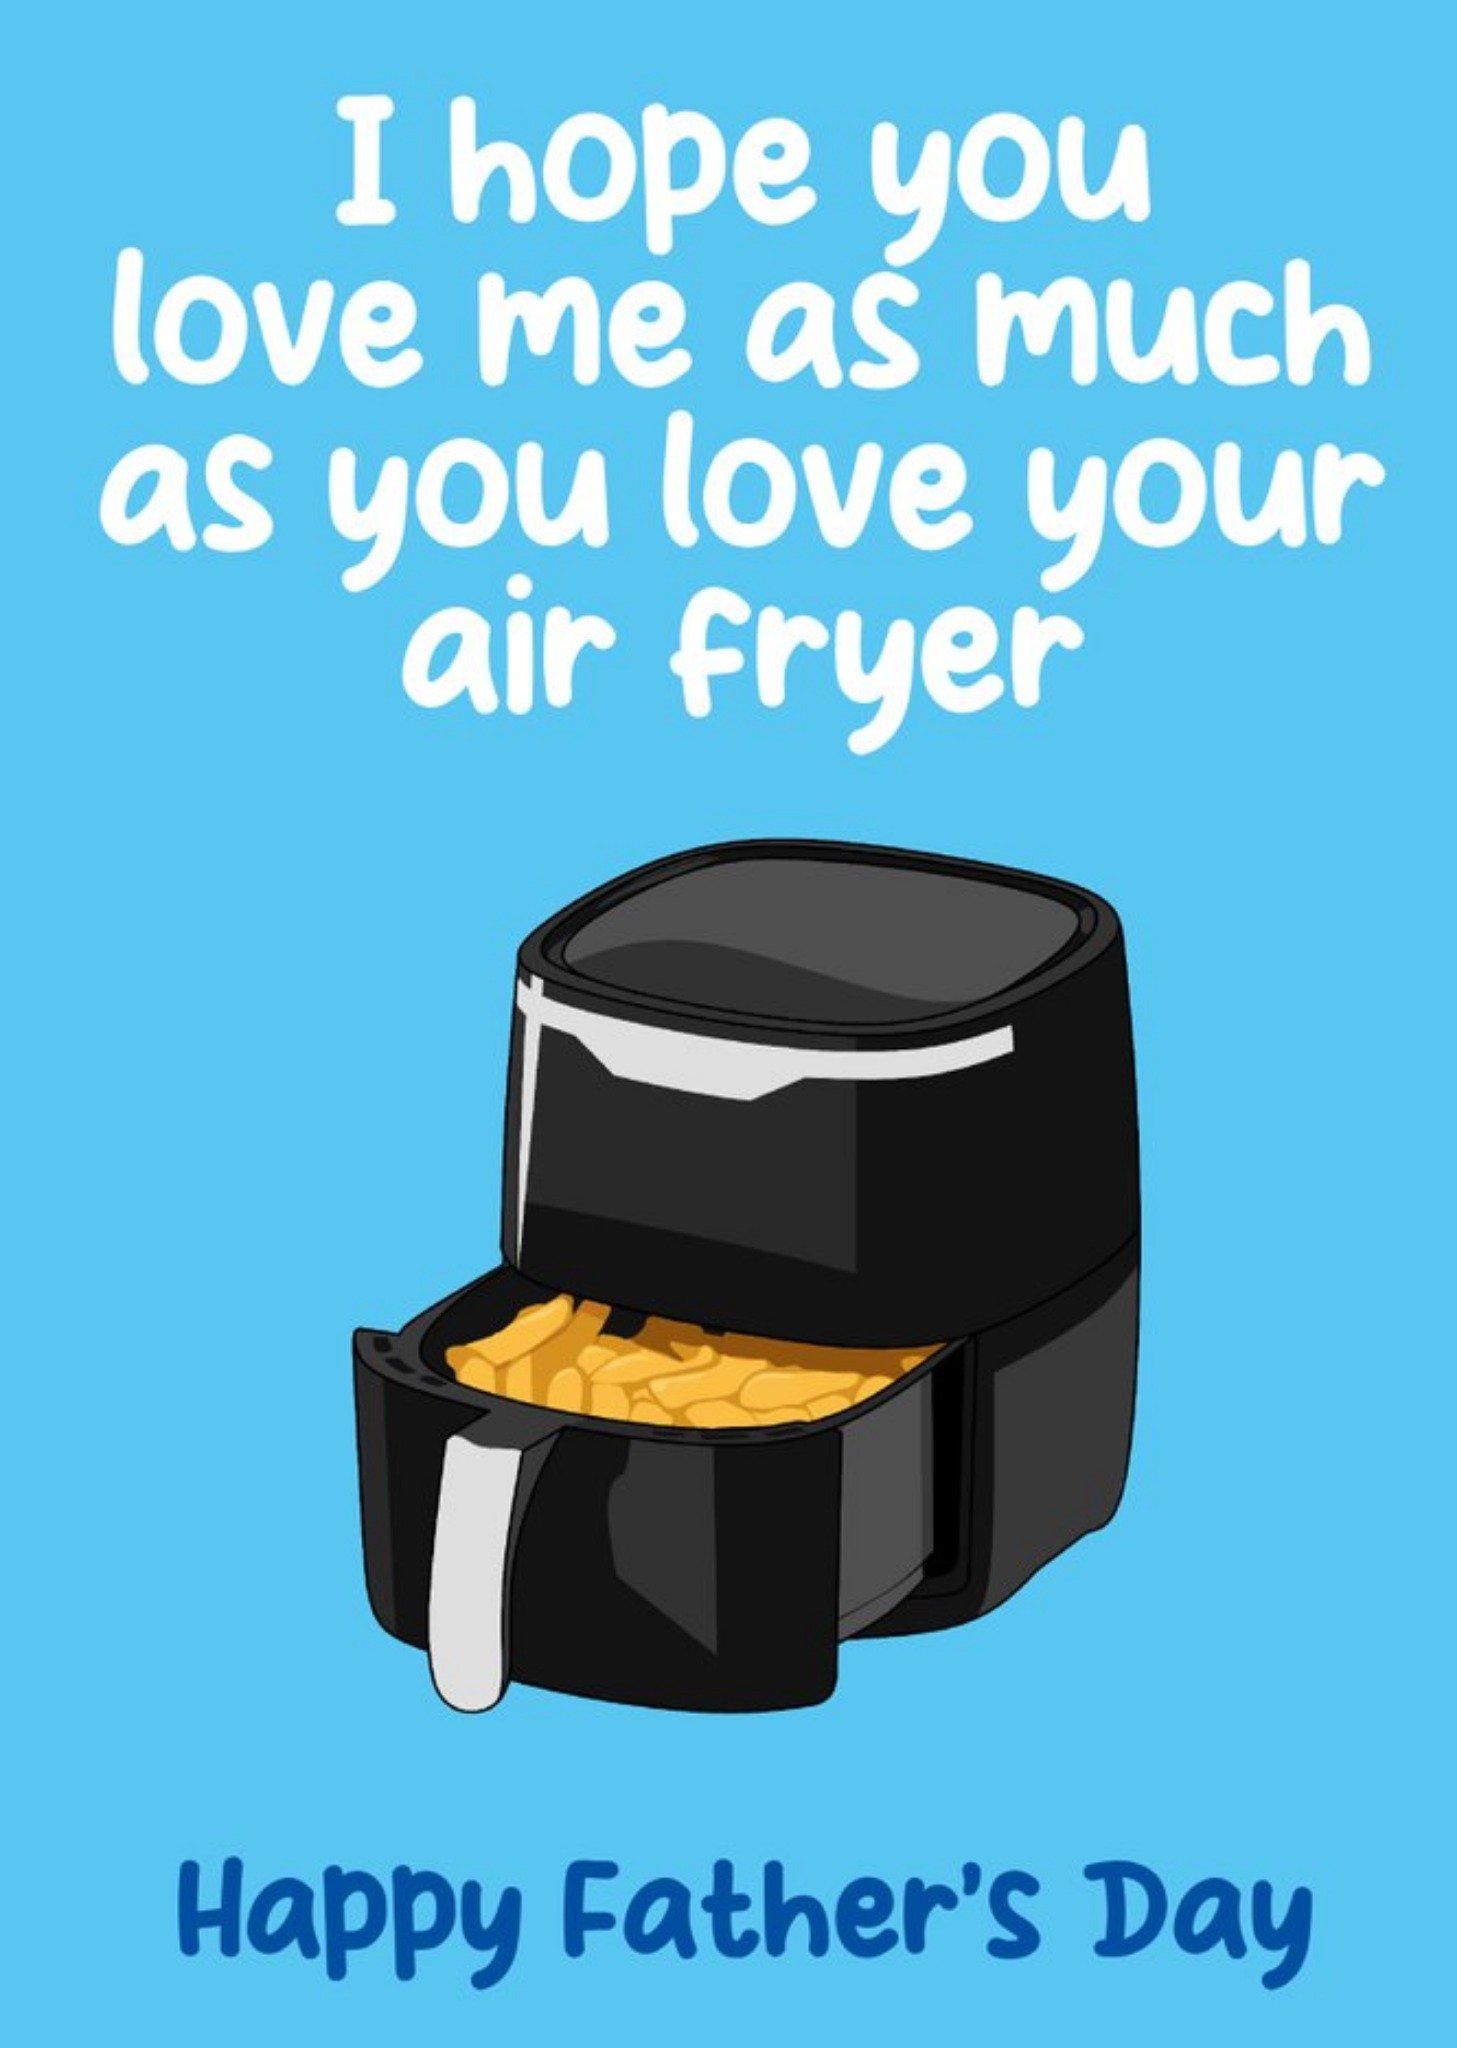 Moonpig Air Fryer Funny Father's Day Card Ecard